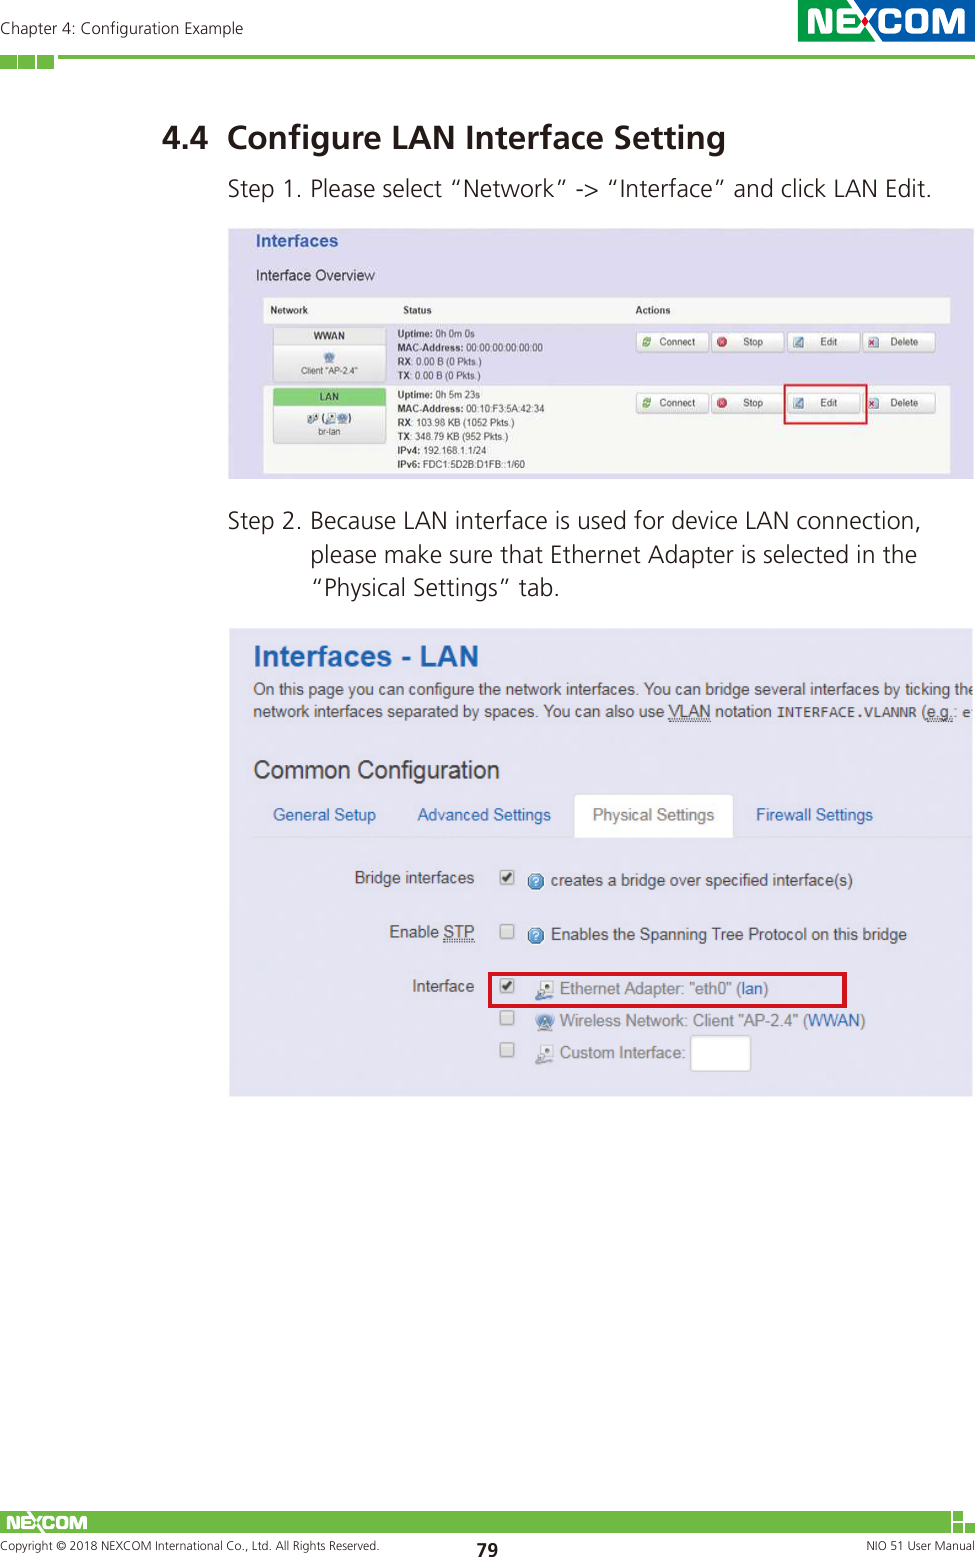 Copyright © 2018 NEXCOM International Co., Ltd. All Rights Reserved. NIO 51 User Manual 79Chapter 4: Configuration Example4.4  Configure LAN Interface SettingStep 1. Please select “Network” -&gt; “Interface” and click LAN Edit.Step 2. Because LAN interface is used for device LAN connection, please make sure that Ethernet Adapter is selected in the “Physical Settings” tab. 